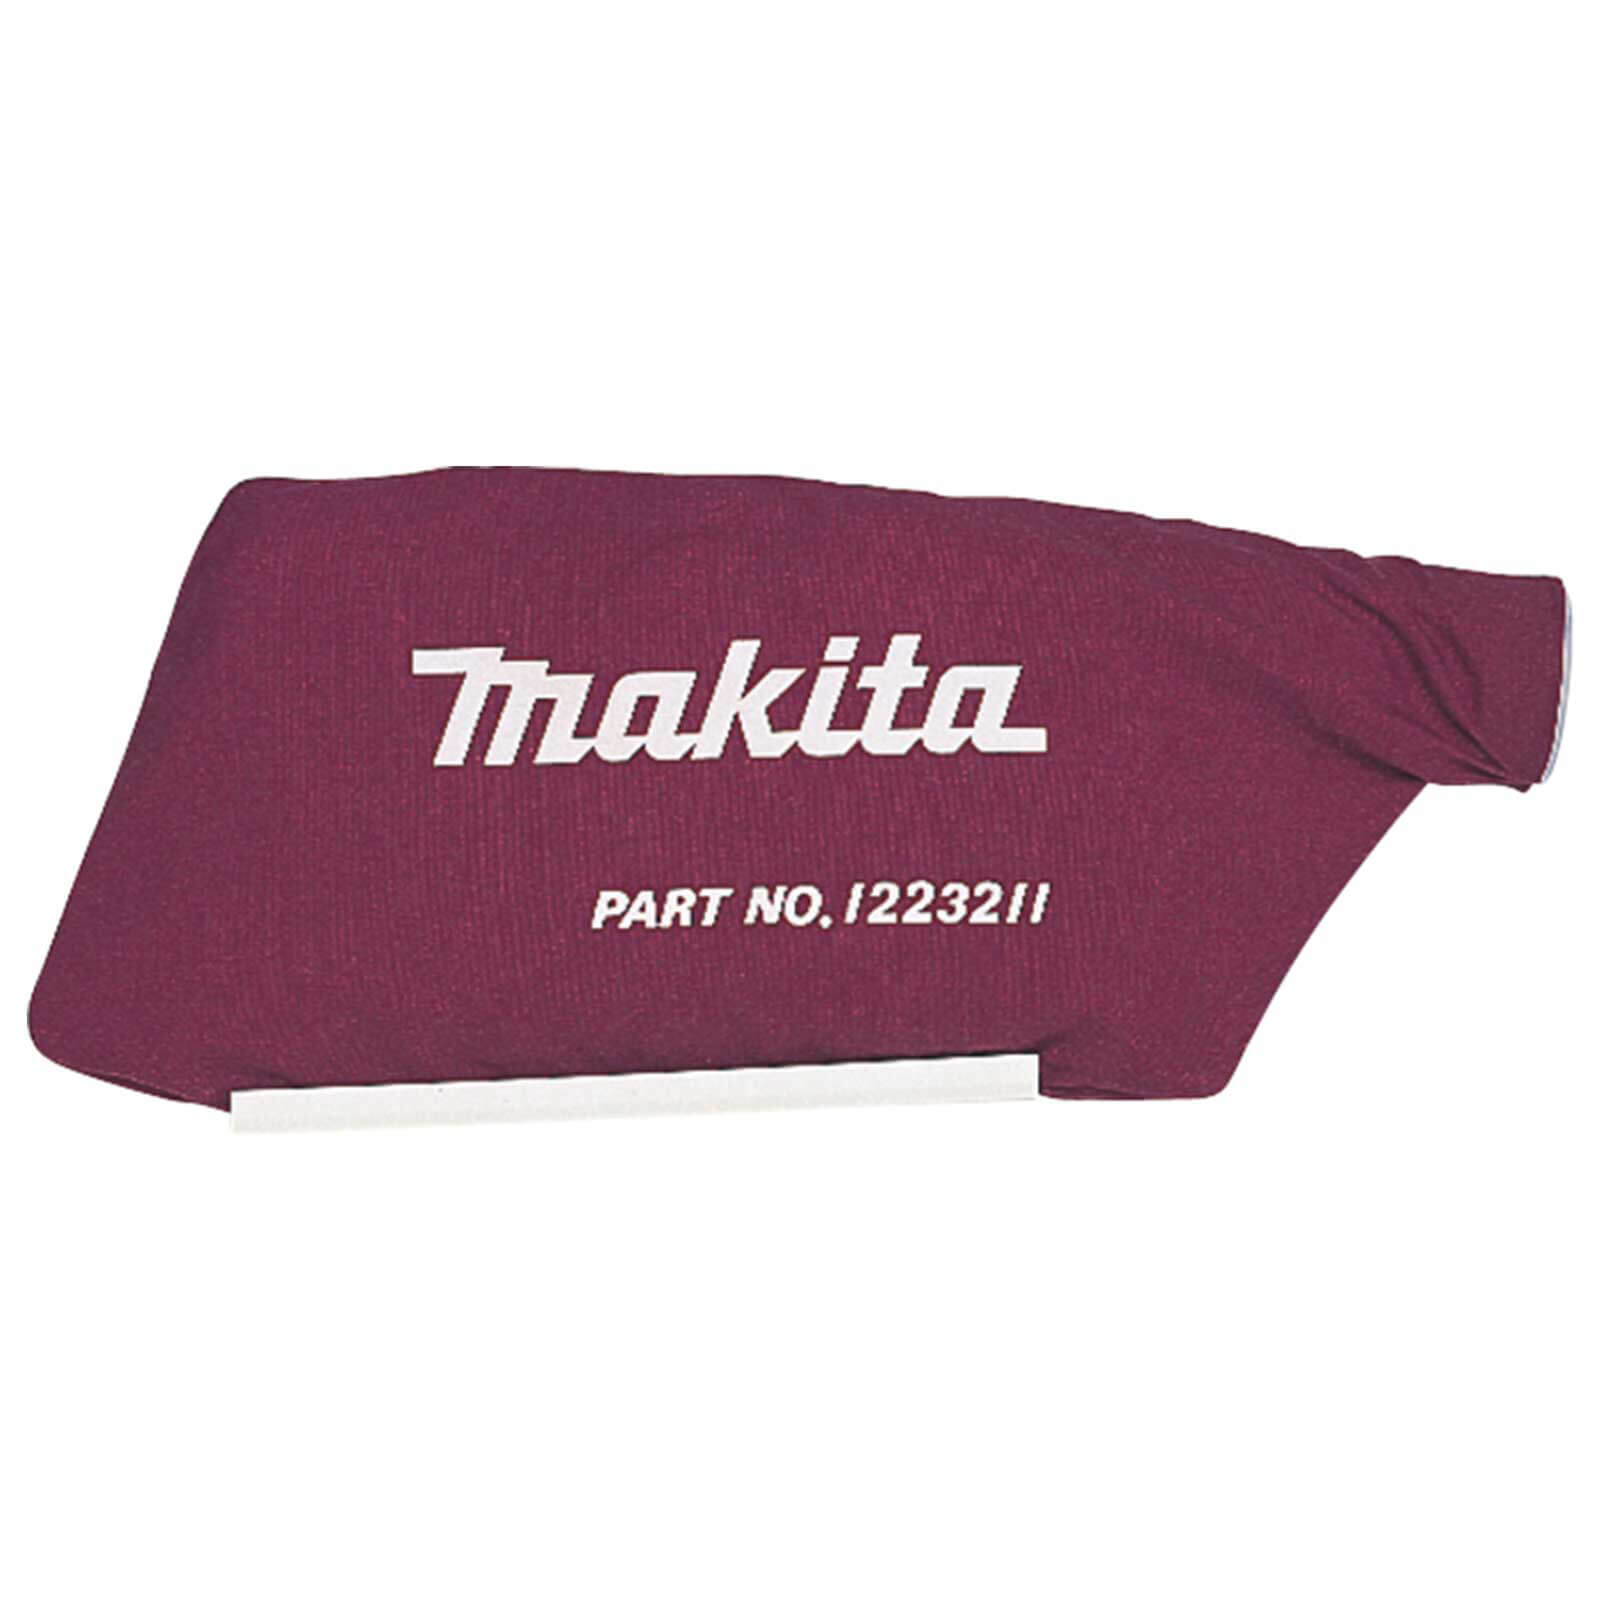 Image of Makita Cloth Dust Bag for 9920 9903 and 9404 Belt Sanders